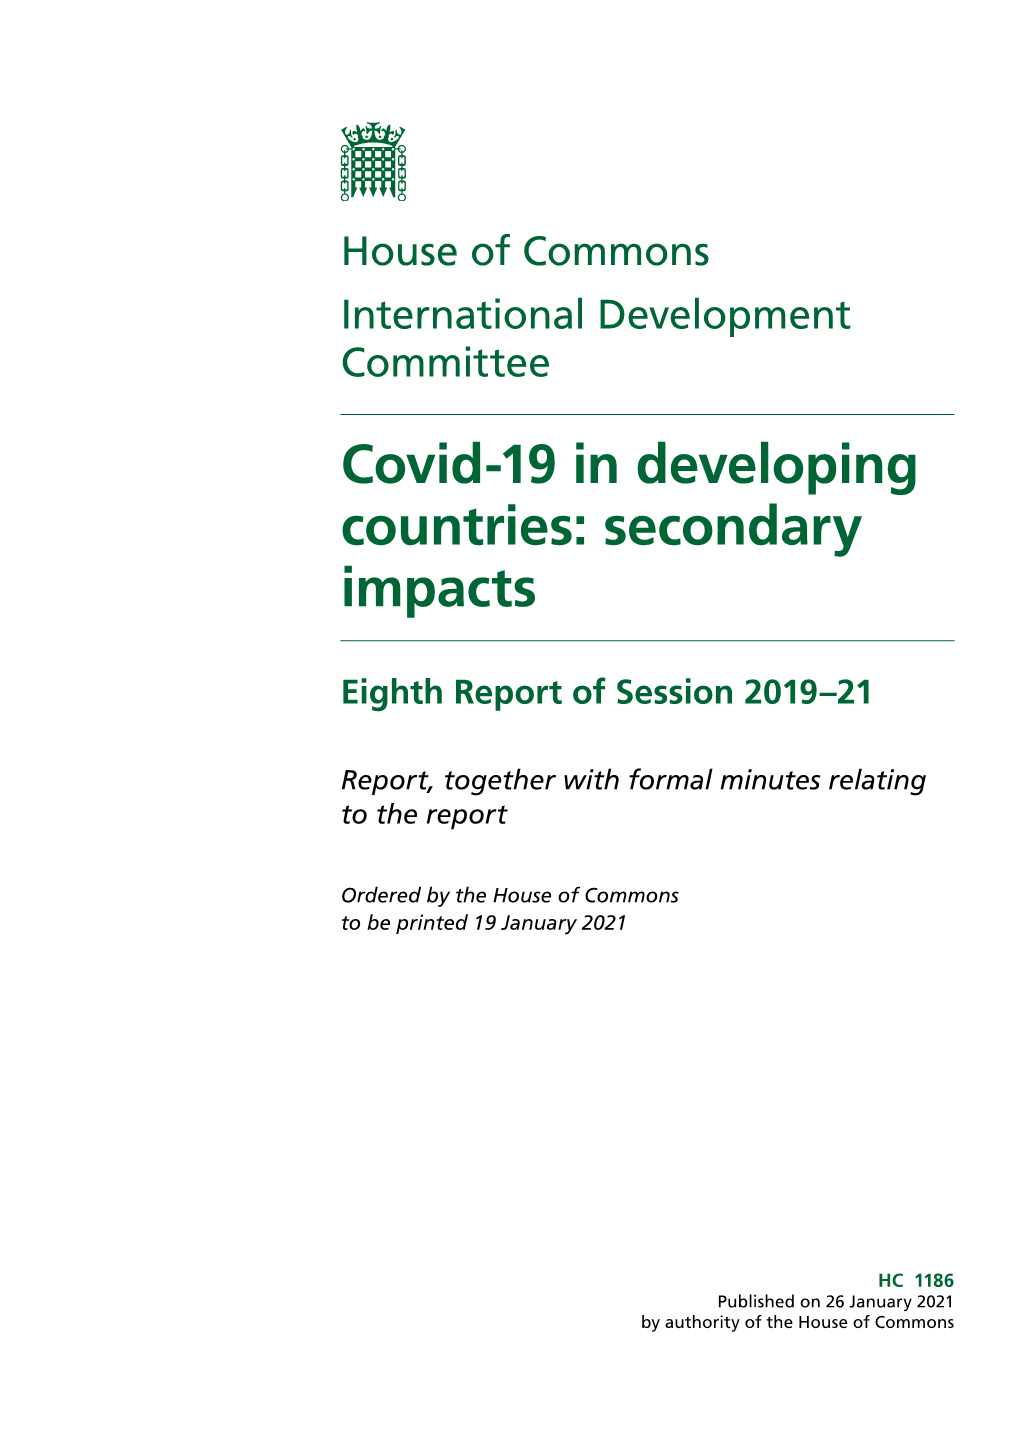 Covid-19 in Developing Countries: Secondary Impacts